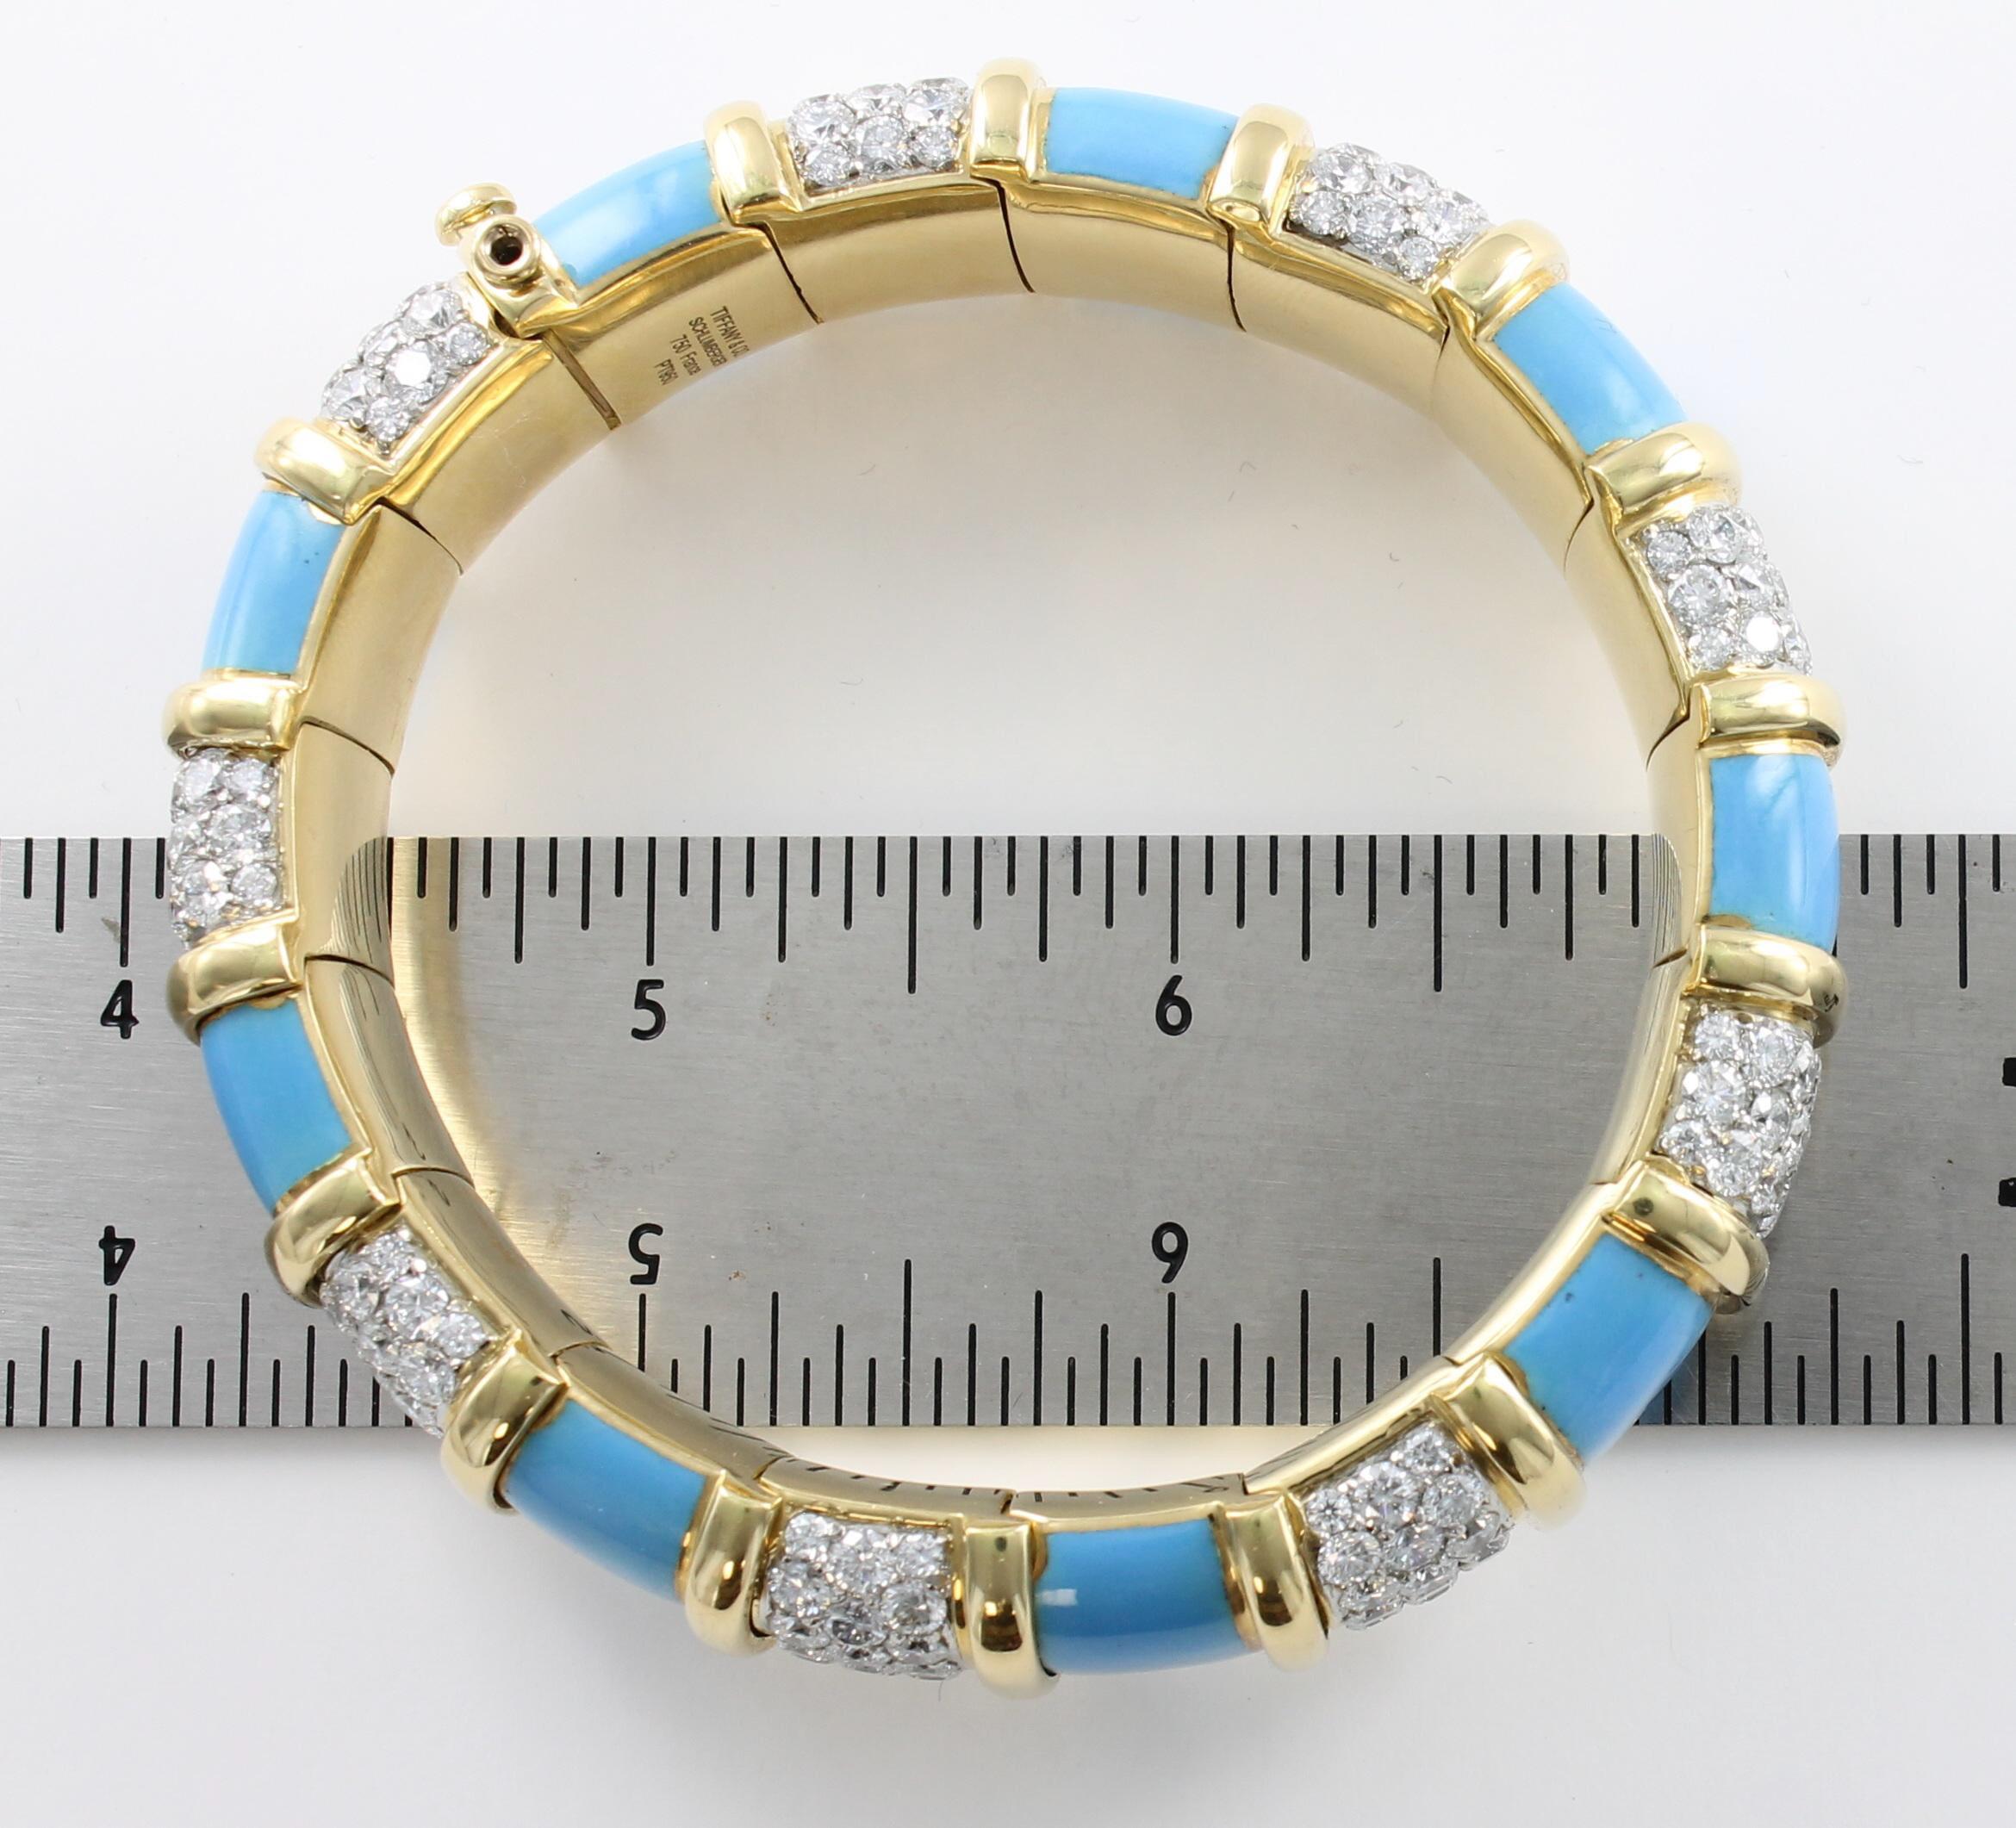 Tiffany & Co. Turquoise Paillone Enamel and Diamond Schlumberger Bracelet For Sale 1